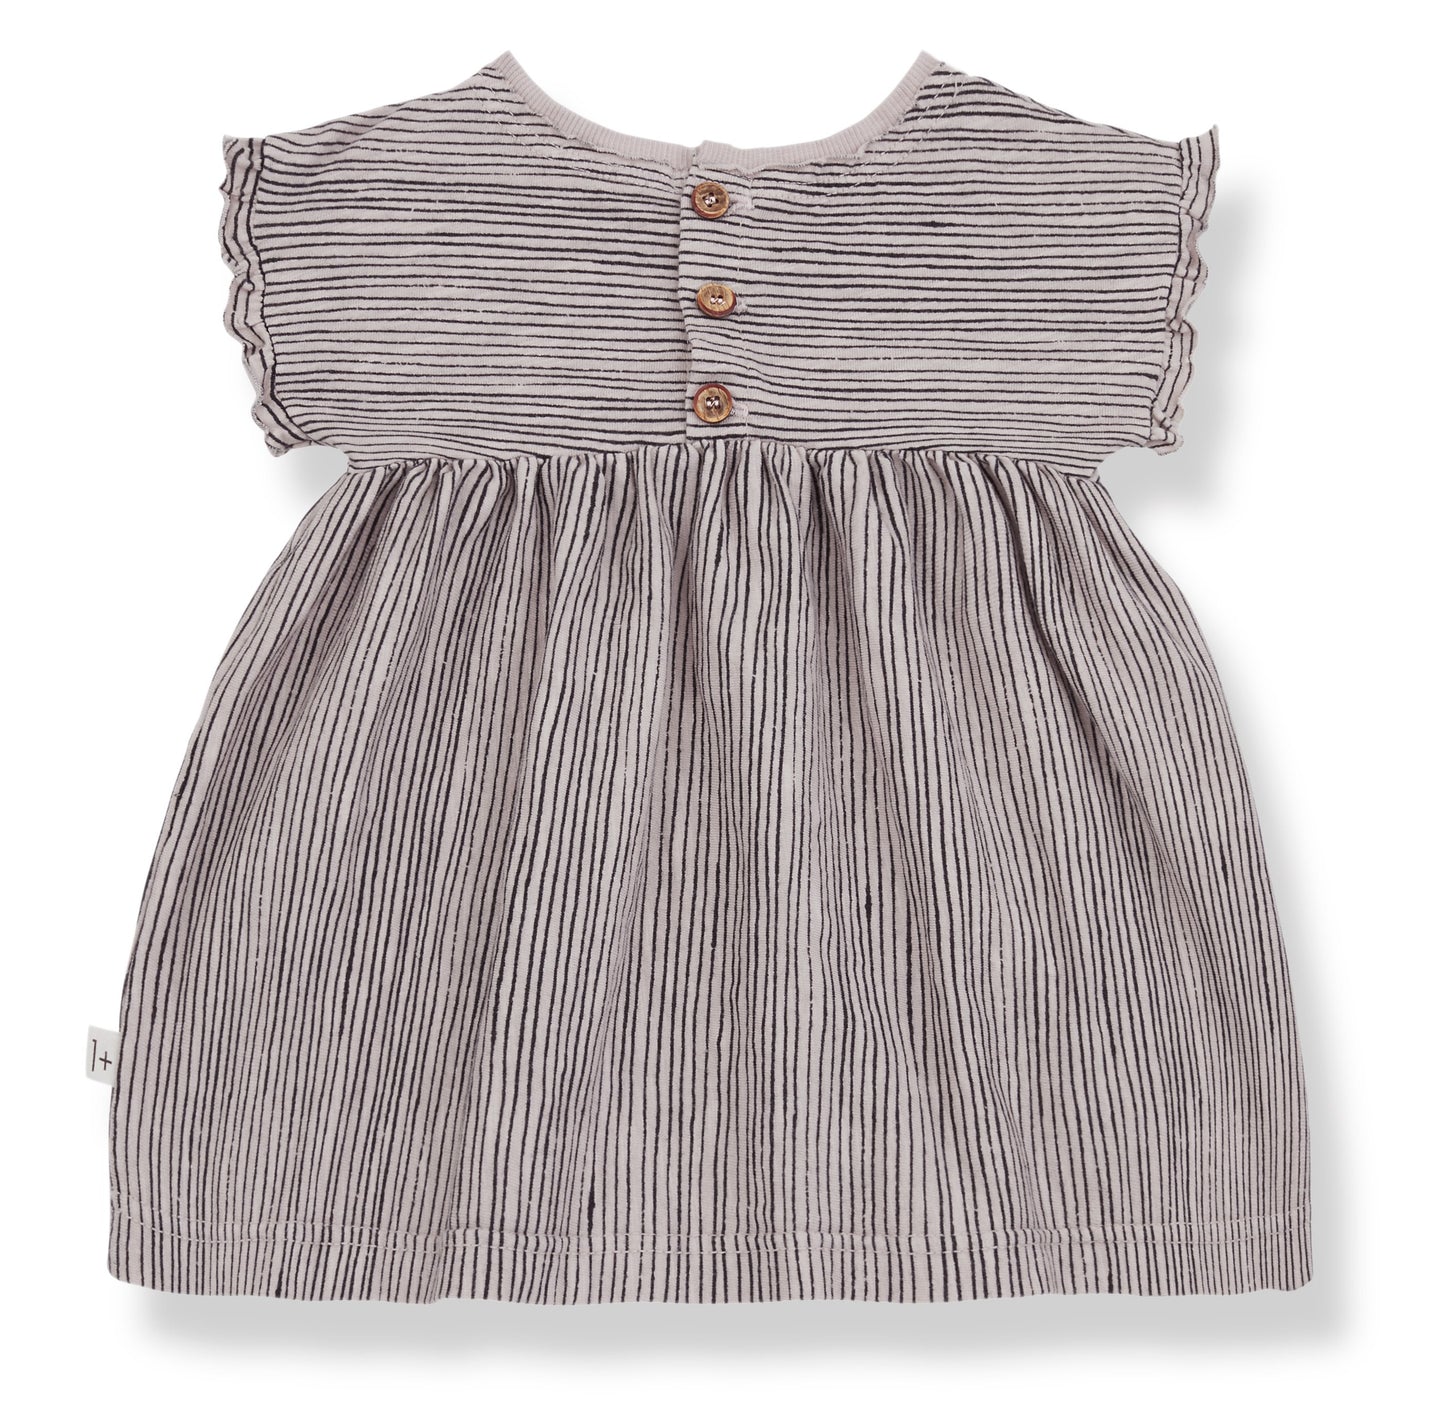 One + In the Family Arlet Dress